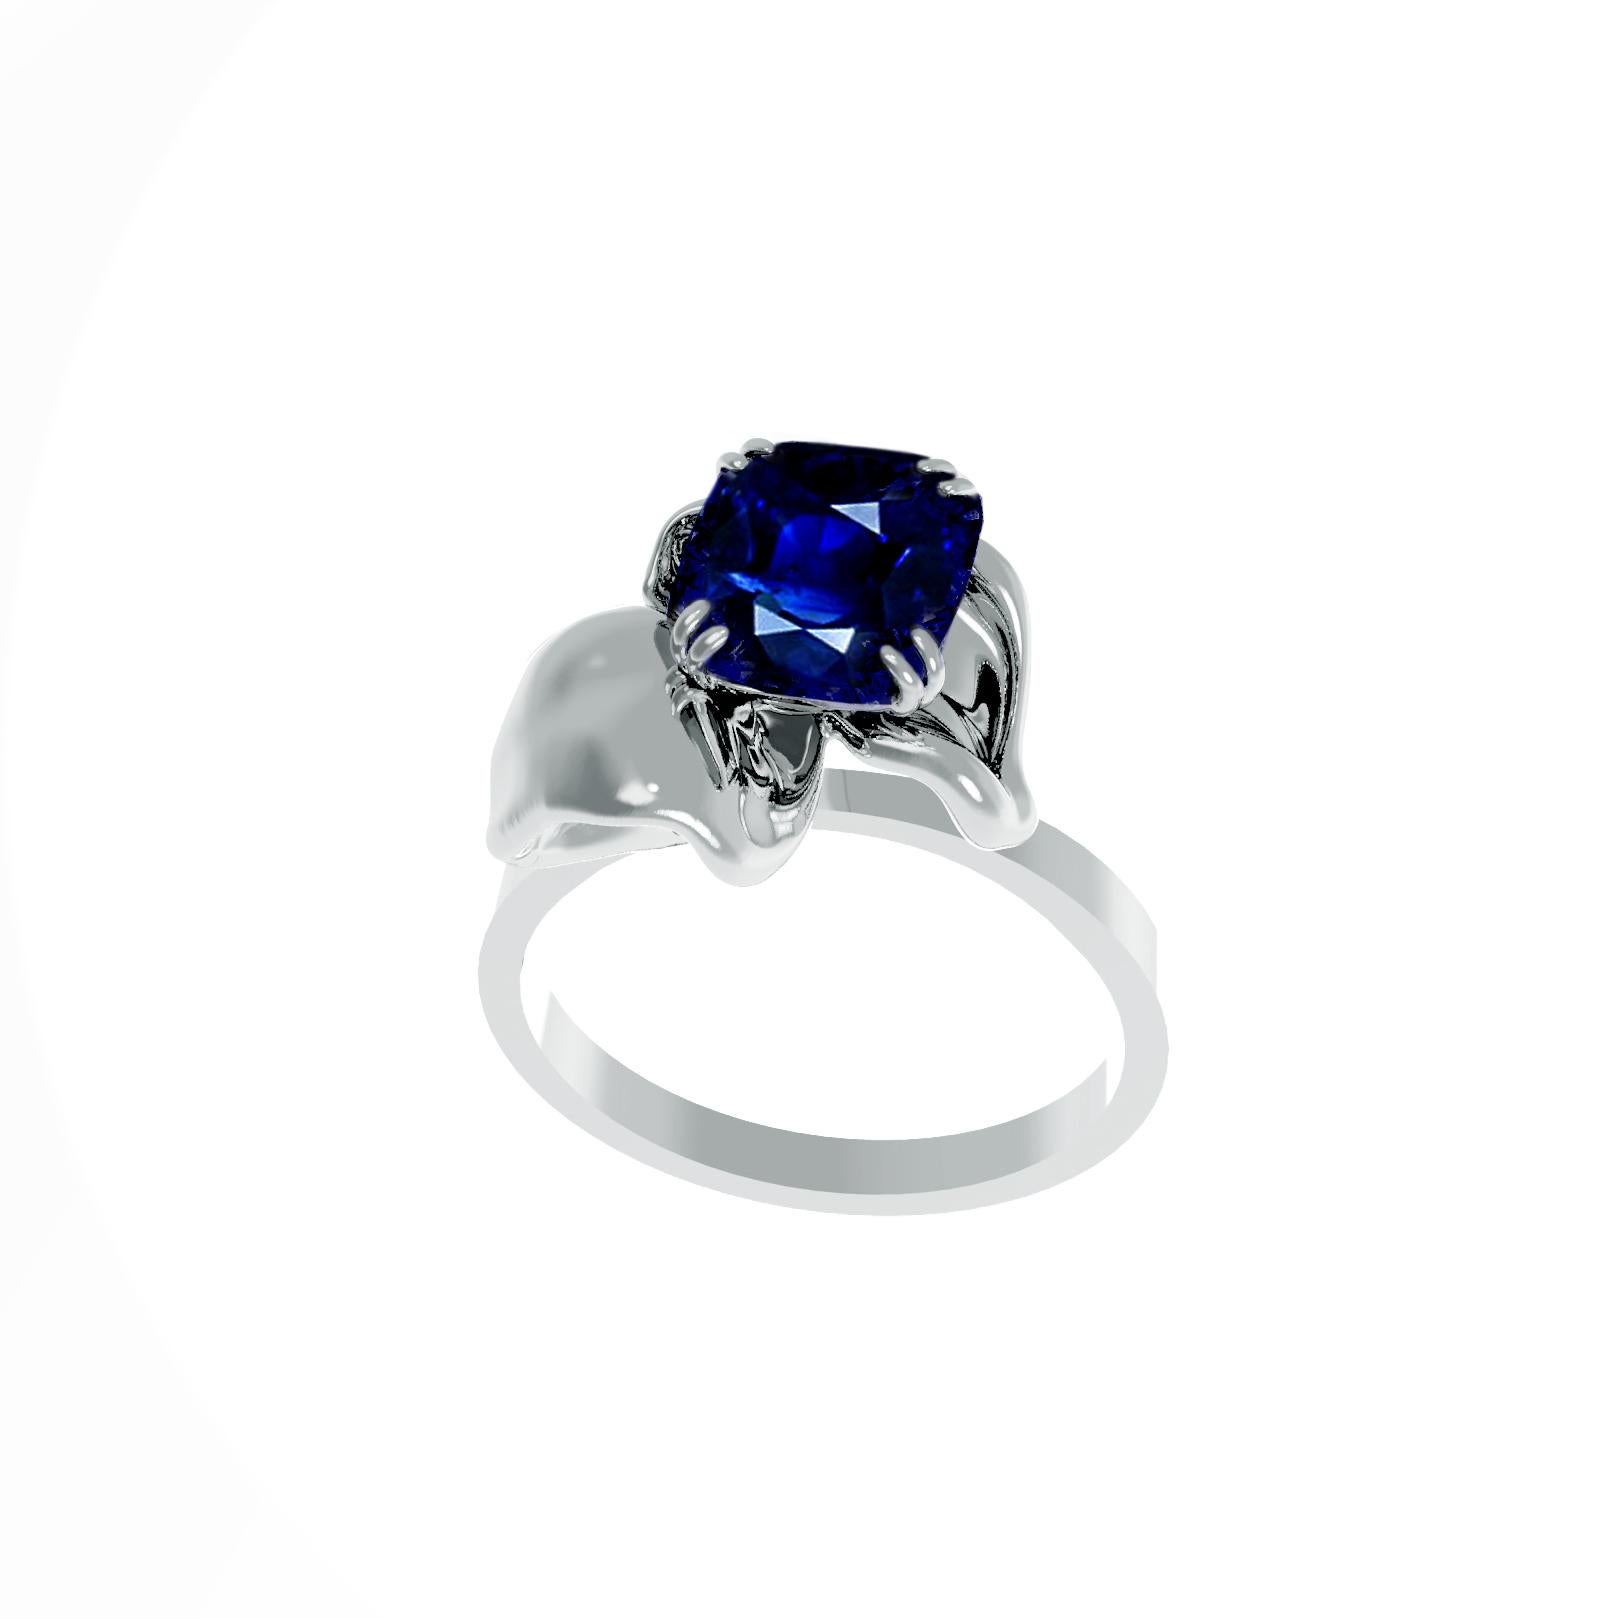 This contemporary cocktail ring is made of 18 karat white gold and is encrusted with a natural vivid blue 1,7 carats great cut transparent cushion sapphire. The ring's unique design features a tiny flower shape that visually enhances the size of the